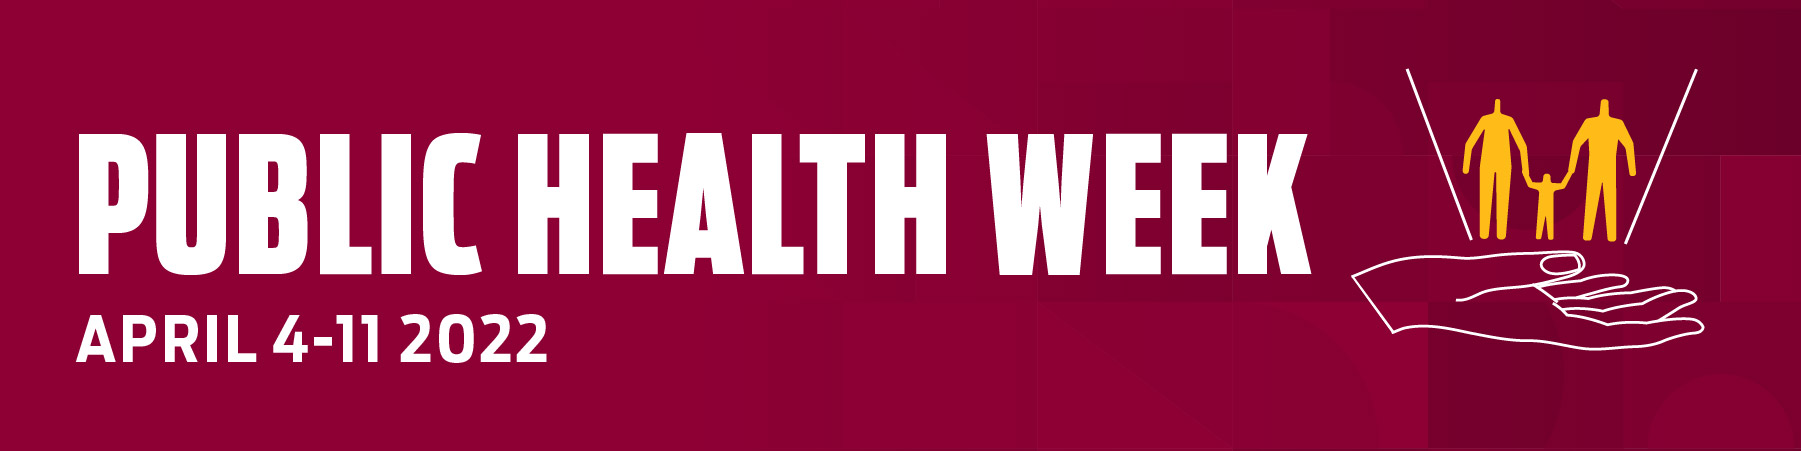 Celebrating National Public Health Week at Loyola University Chicago's Parkinson School of Health Sciences and Public Health 